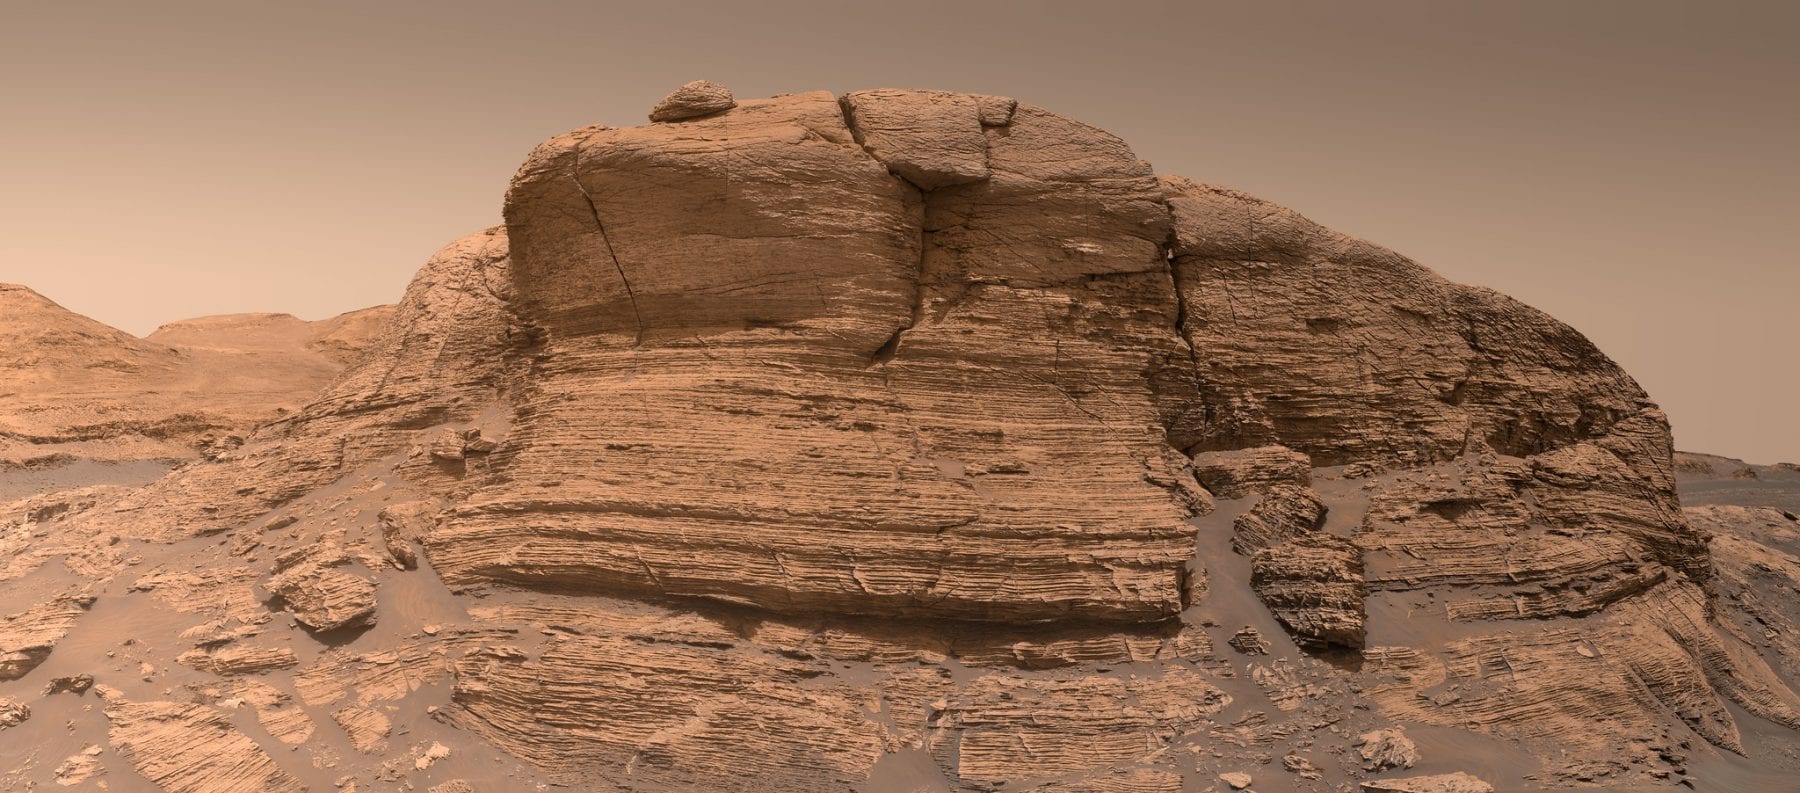 This was the first high-resolution panorama image of Mont Mercou sent by the Curiosity rover. Credit: NASA / JPL-Caltech / MSSS / Kevin M. Gill - CC BY 2.0